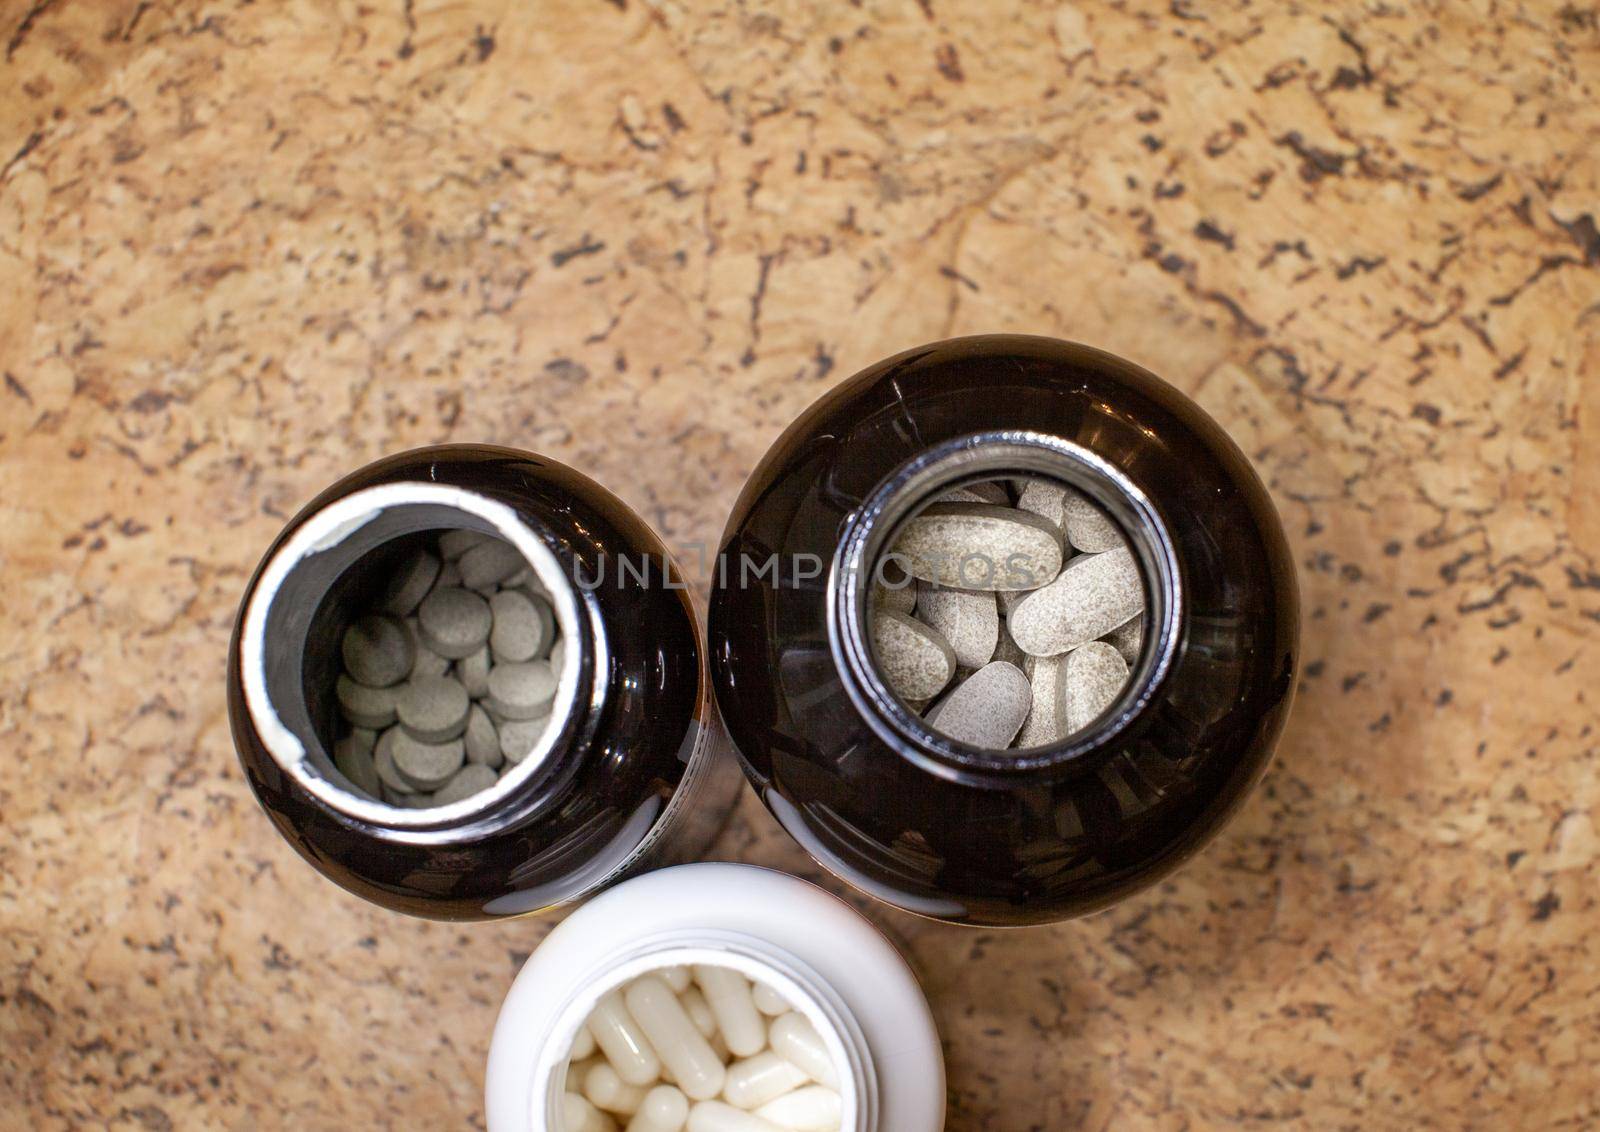 Various capsules and tablets with food additives or medicines in a jar. The view from the top